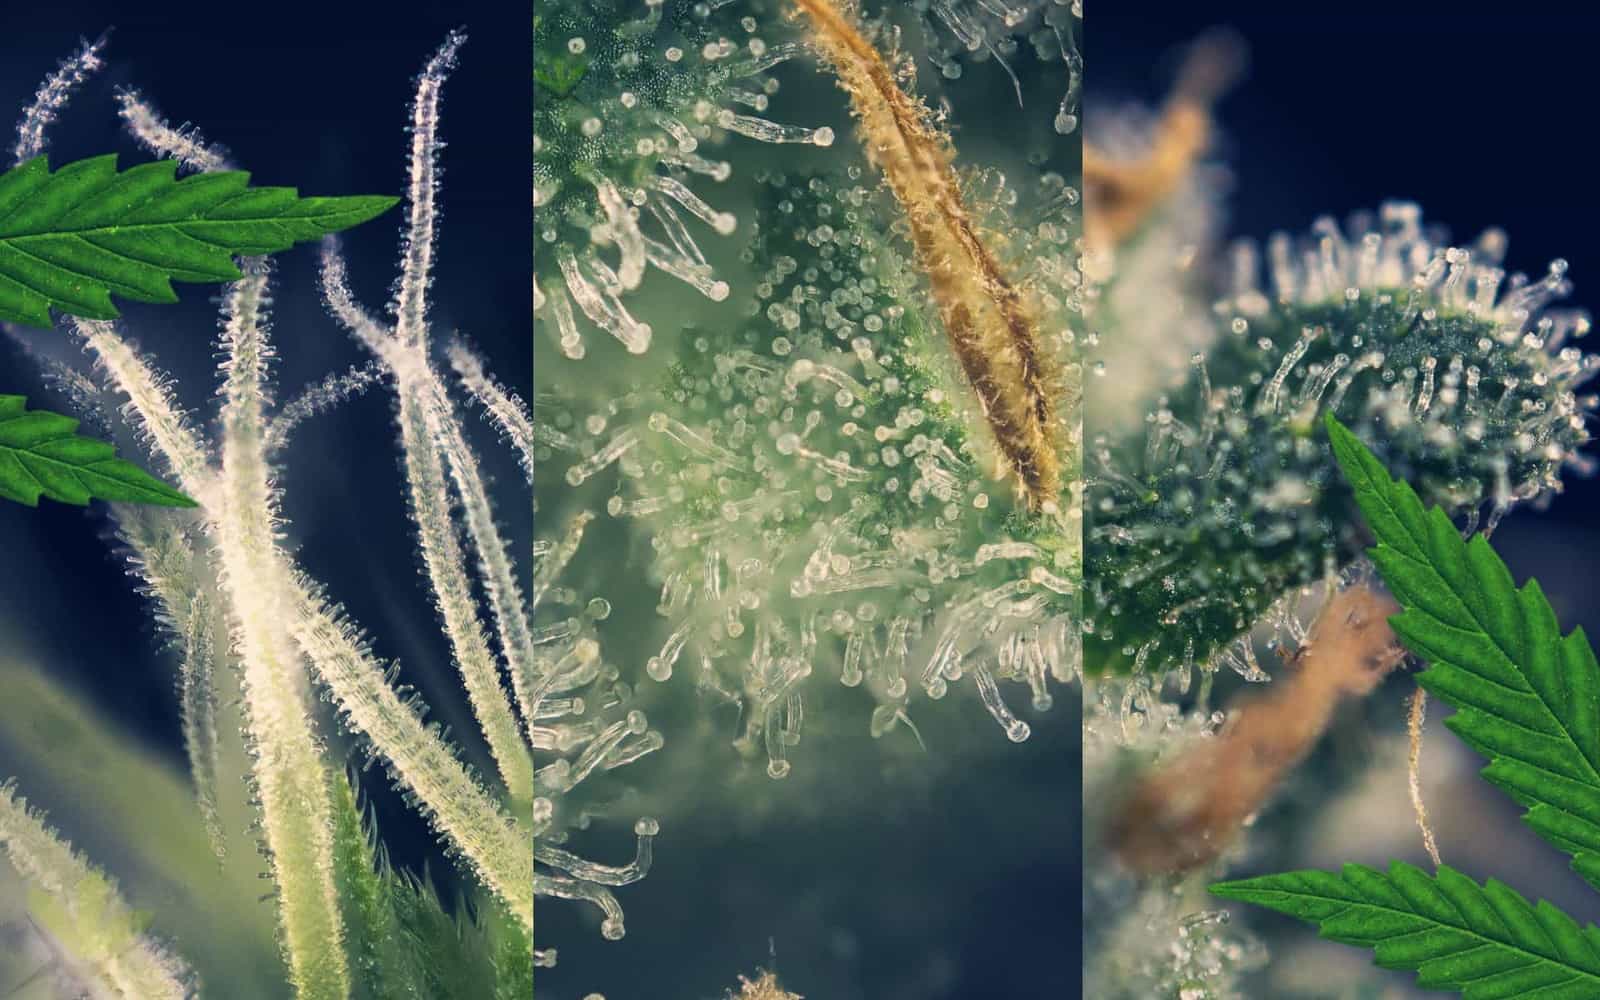 The Most Common Terpenes Found in Cannabis